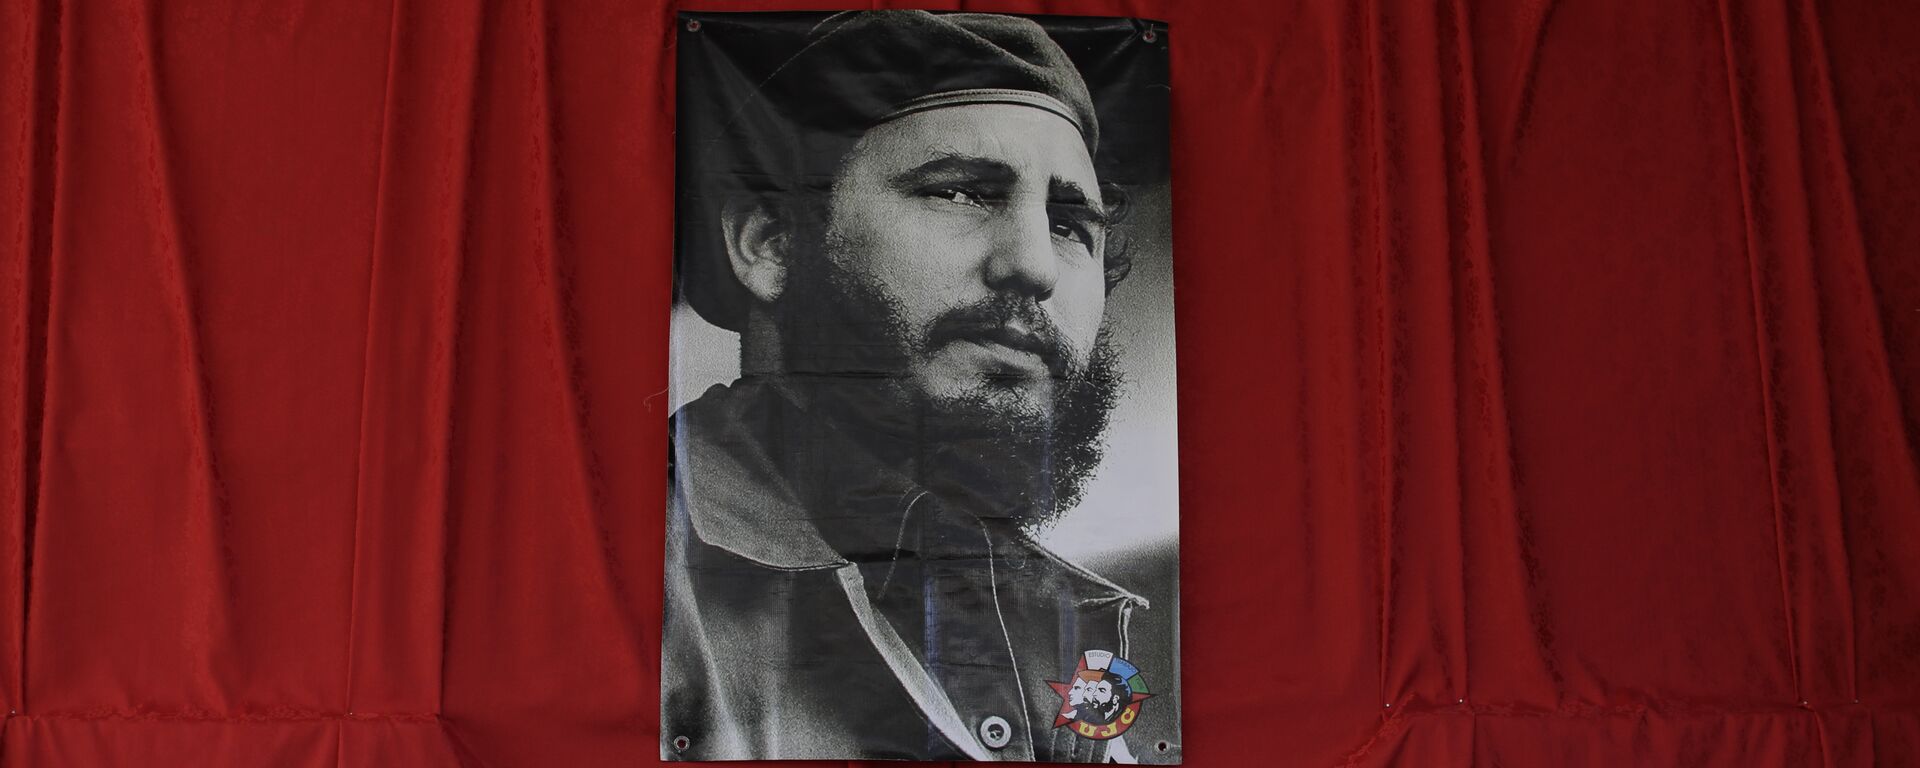 A photograph of the late Fidel Castro hangs at a memorial in his honor in Guanabacoa on the outskirts of Havana, Cuba, Monday, - Sputnik Mundo, 1920, 24.11.2021